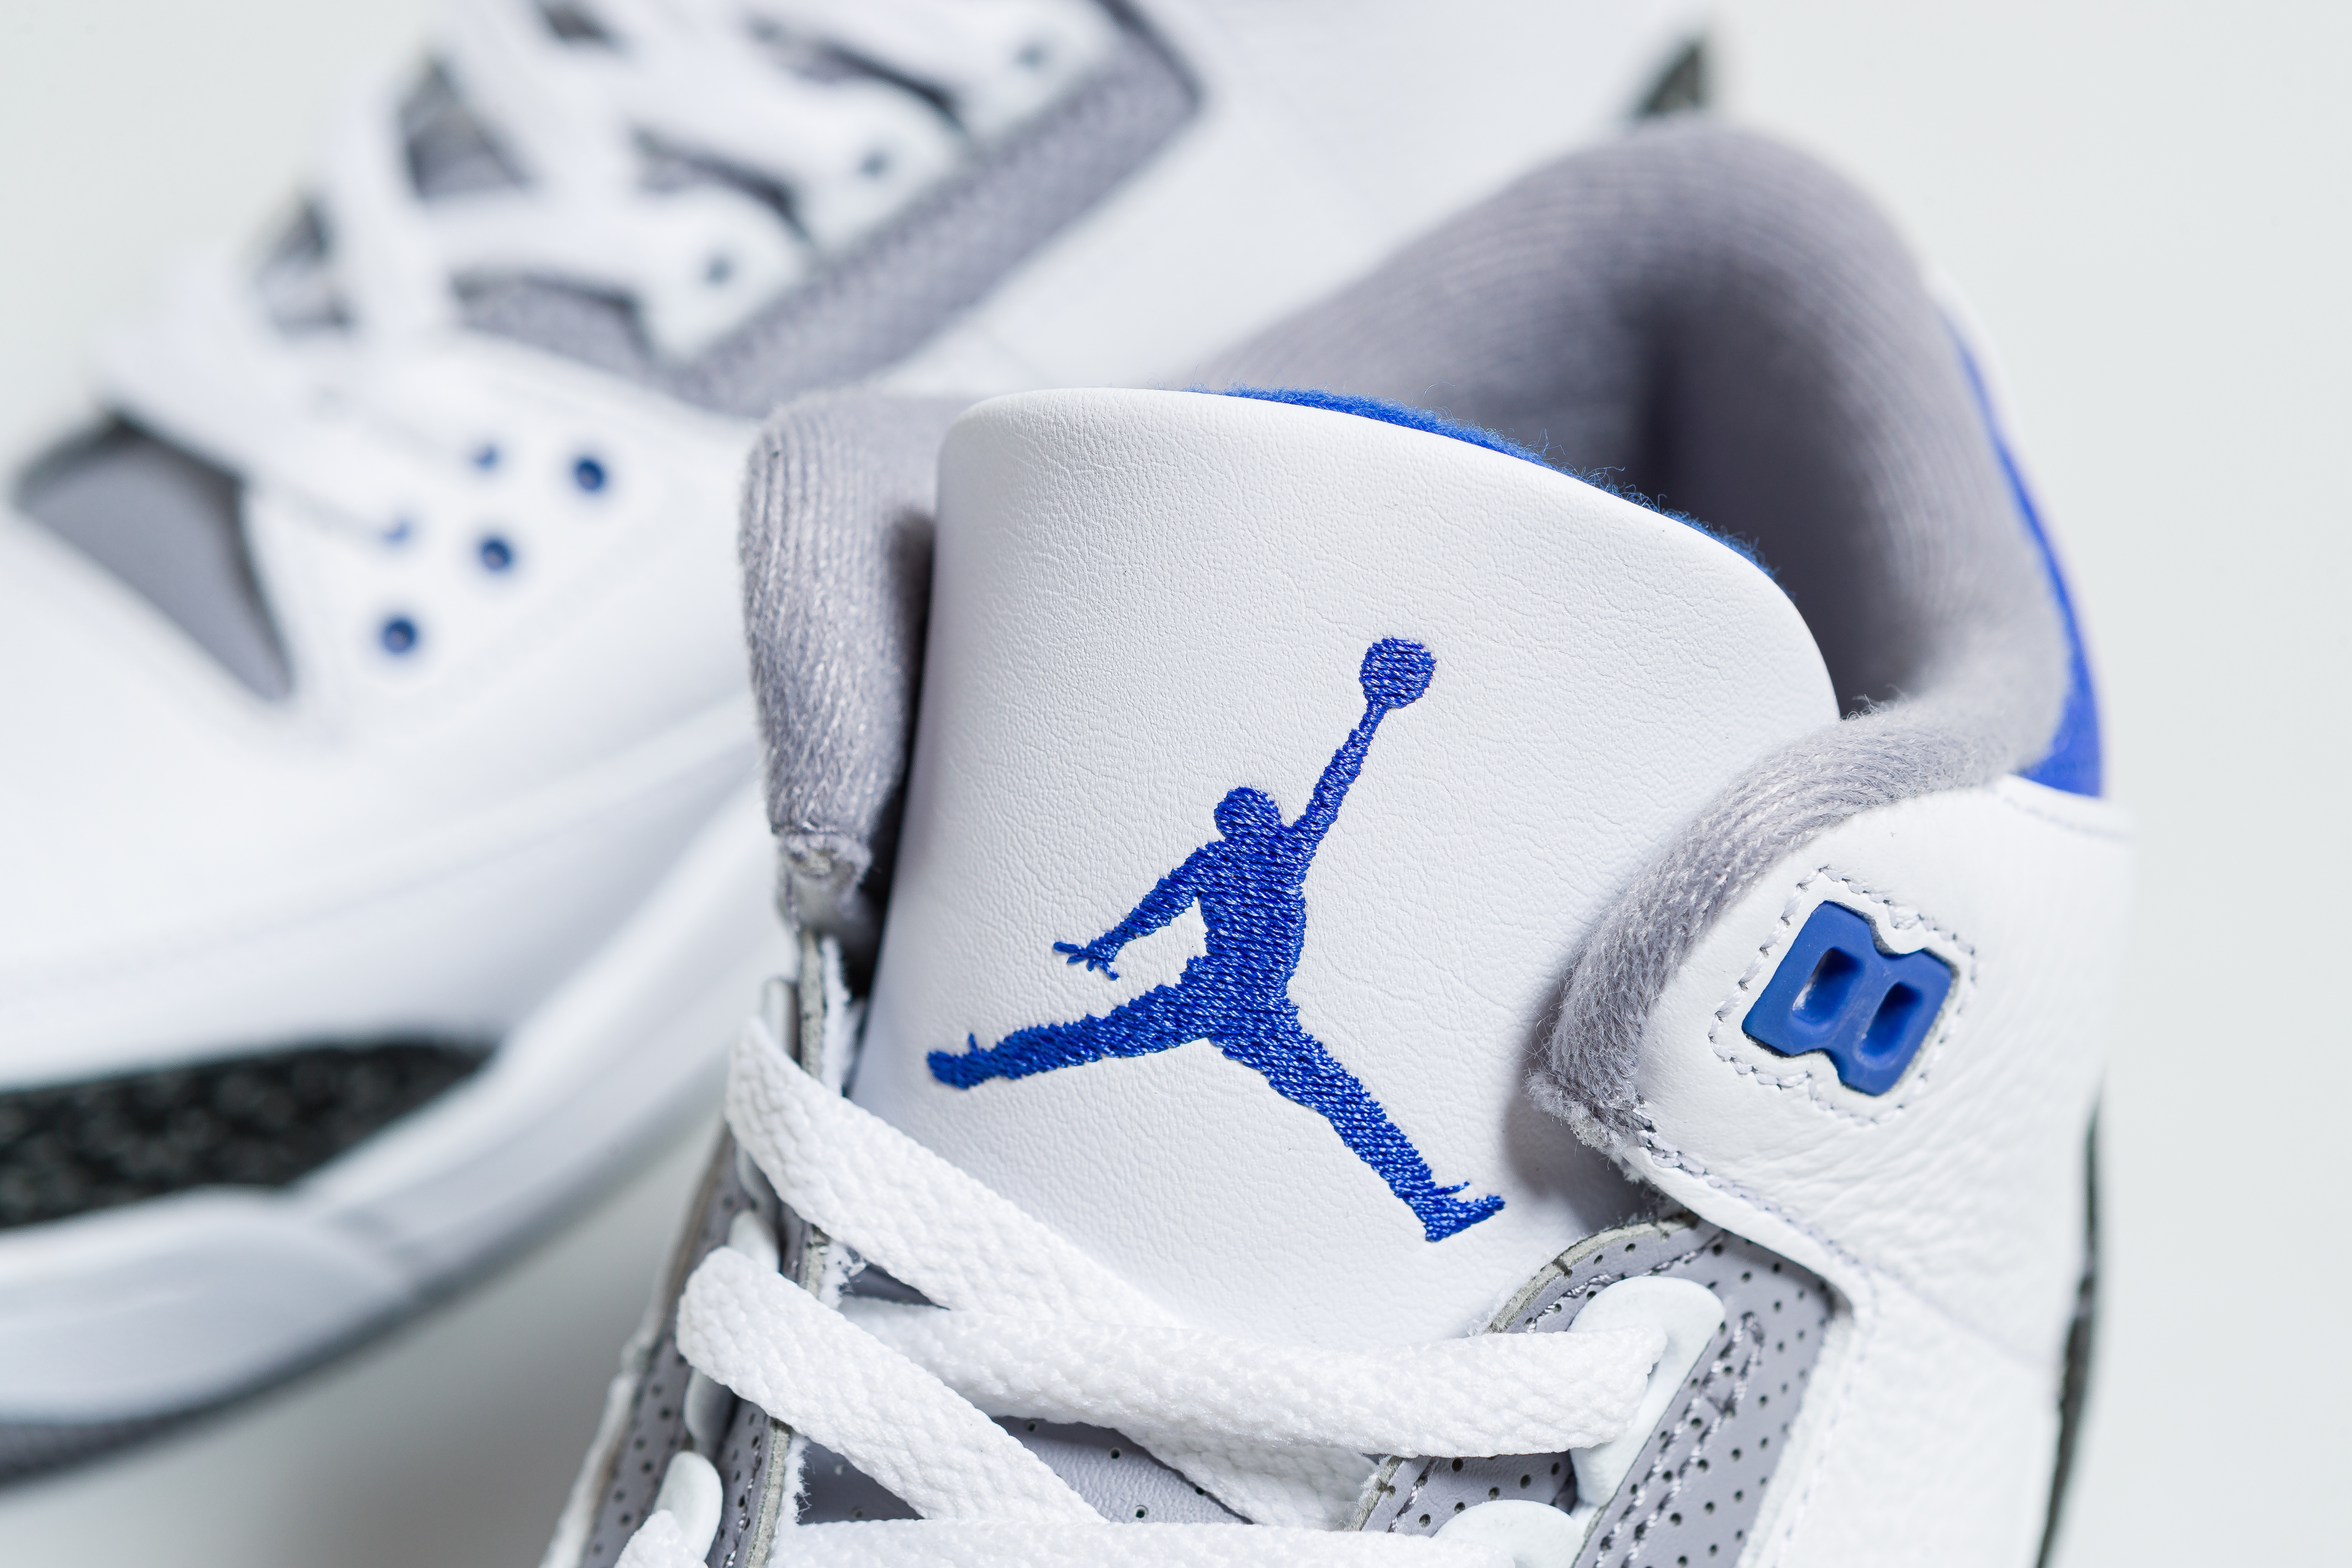 Up There Launches - Nike Air Jordan 3 Retro 'Racer Blue'